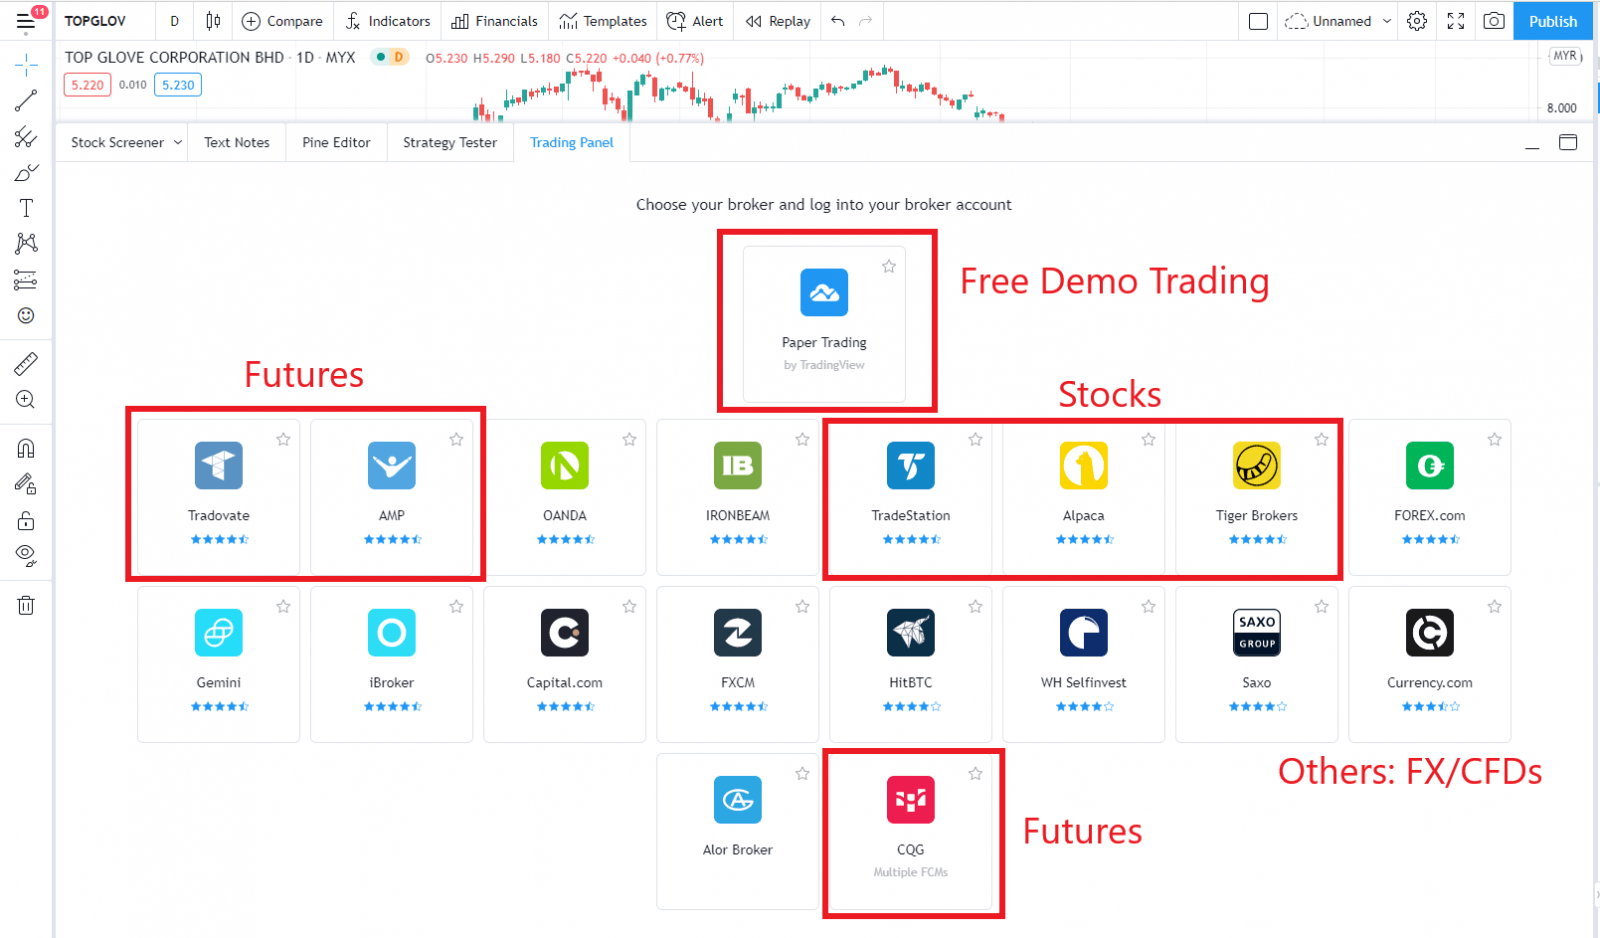 You can connect your brokers and execute directly on TradingView.